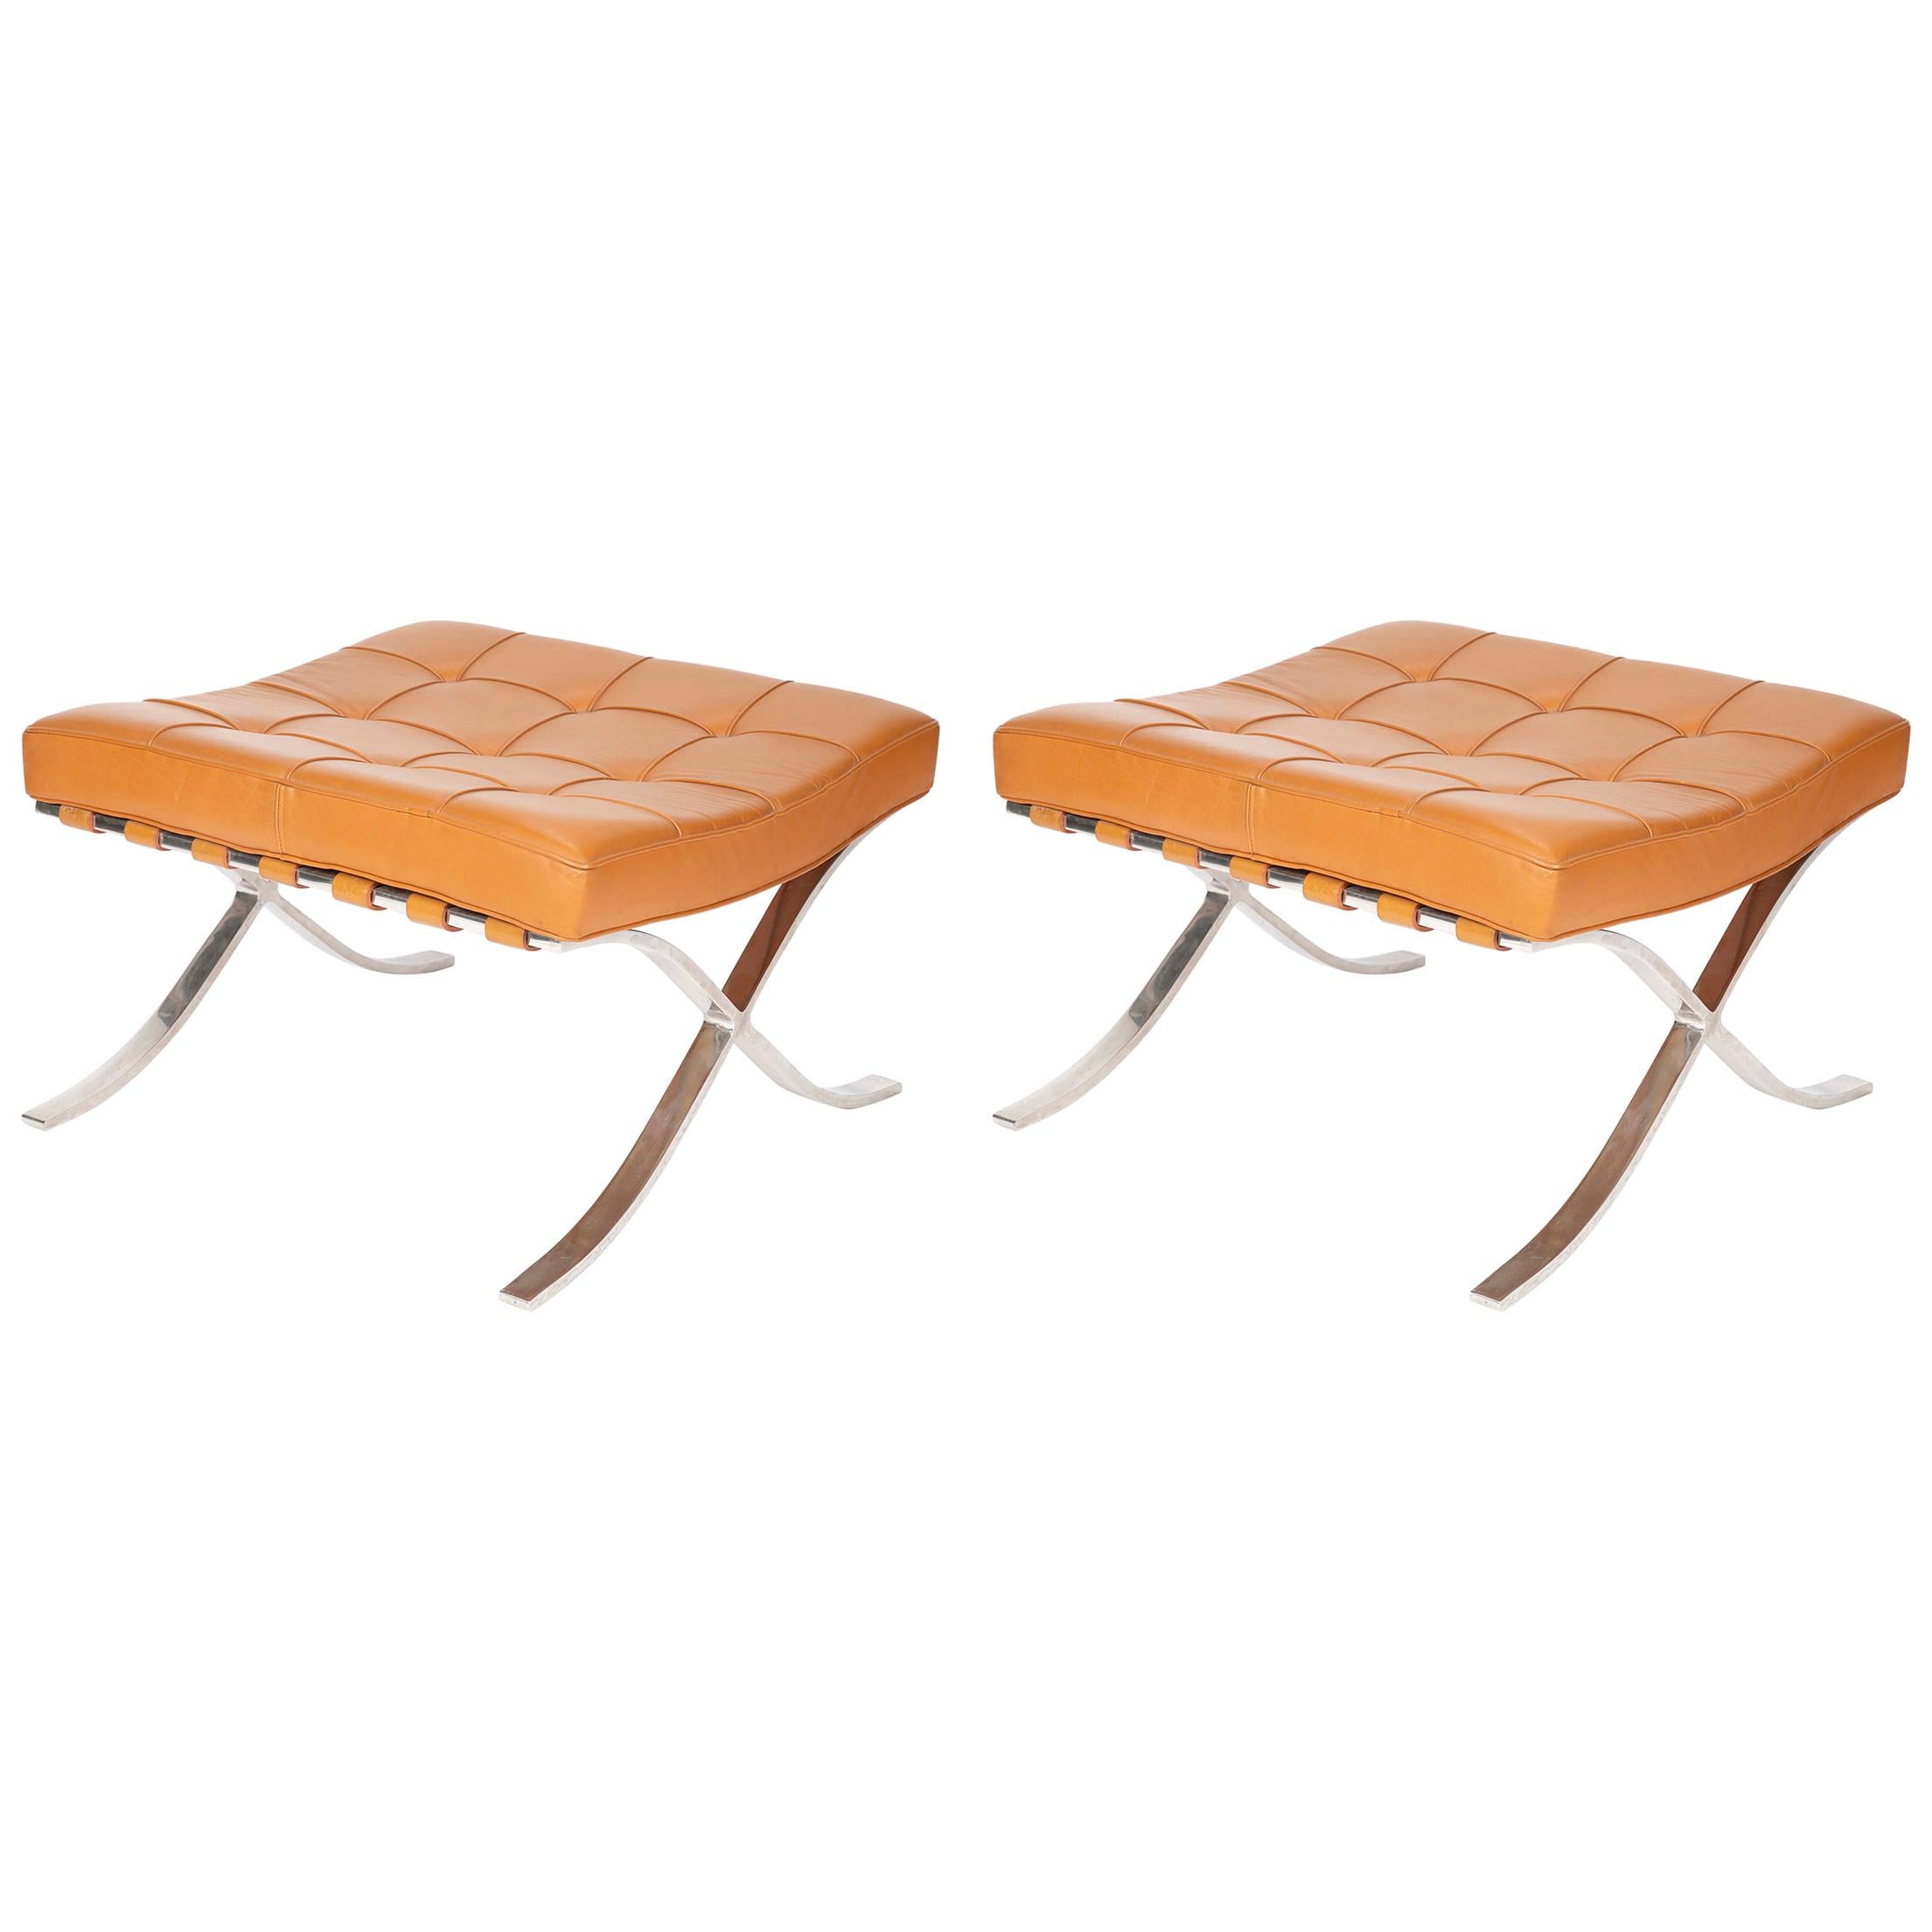 Pair of Mies van der Rohe for Knoll Barcelona Ottomans